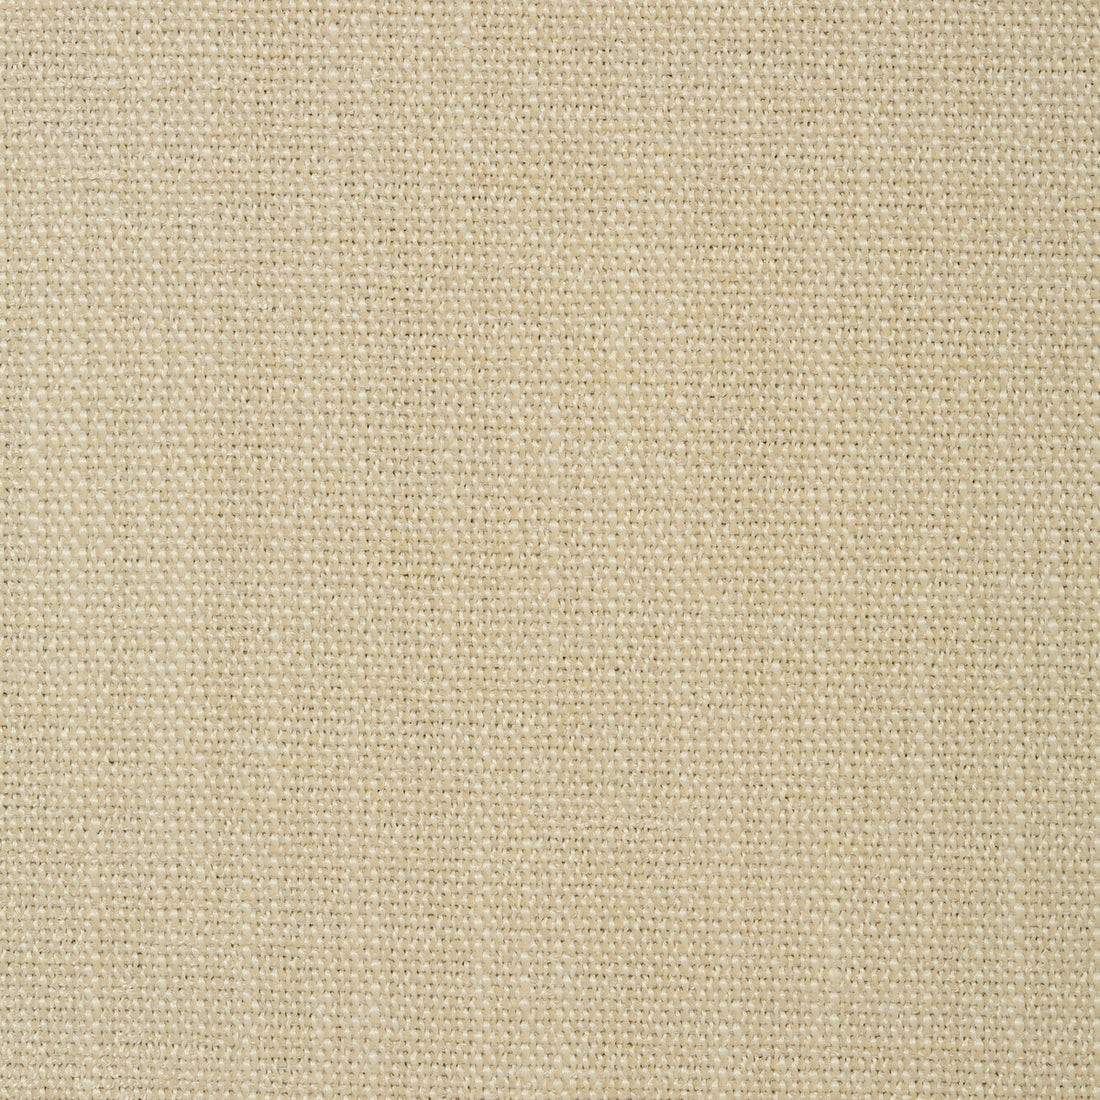 Kravet Smart fabric in 35113-116 color - pattern 35113.116.0 - by Kravet Smart in the Performance Crypton Home collection